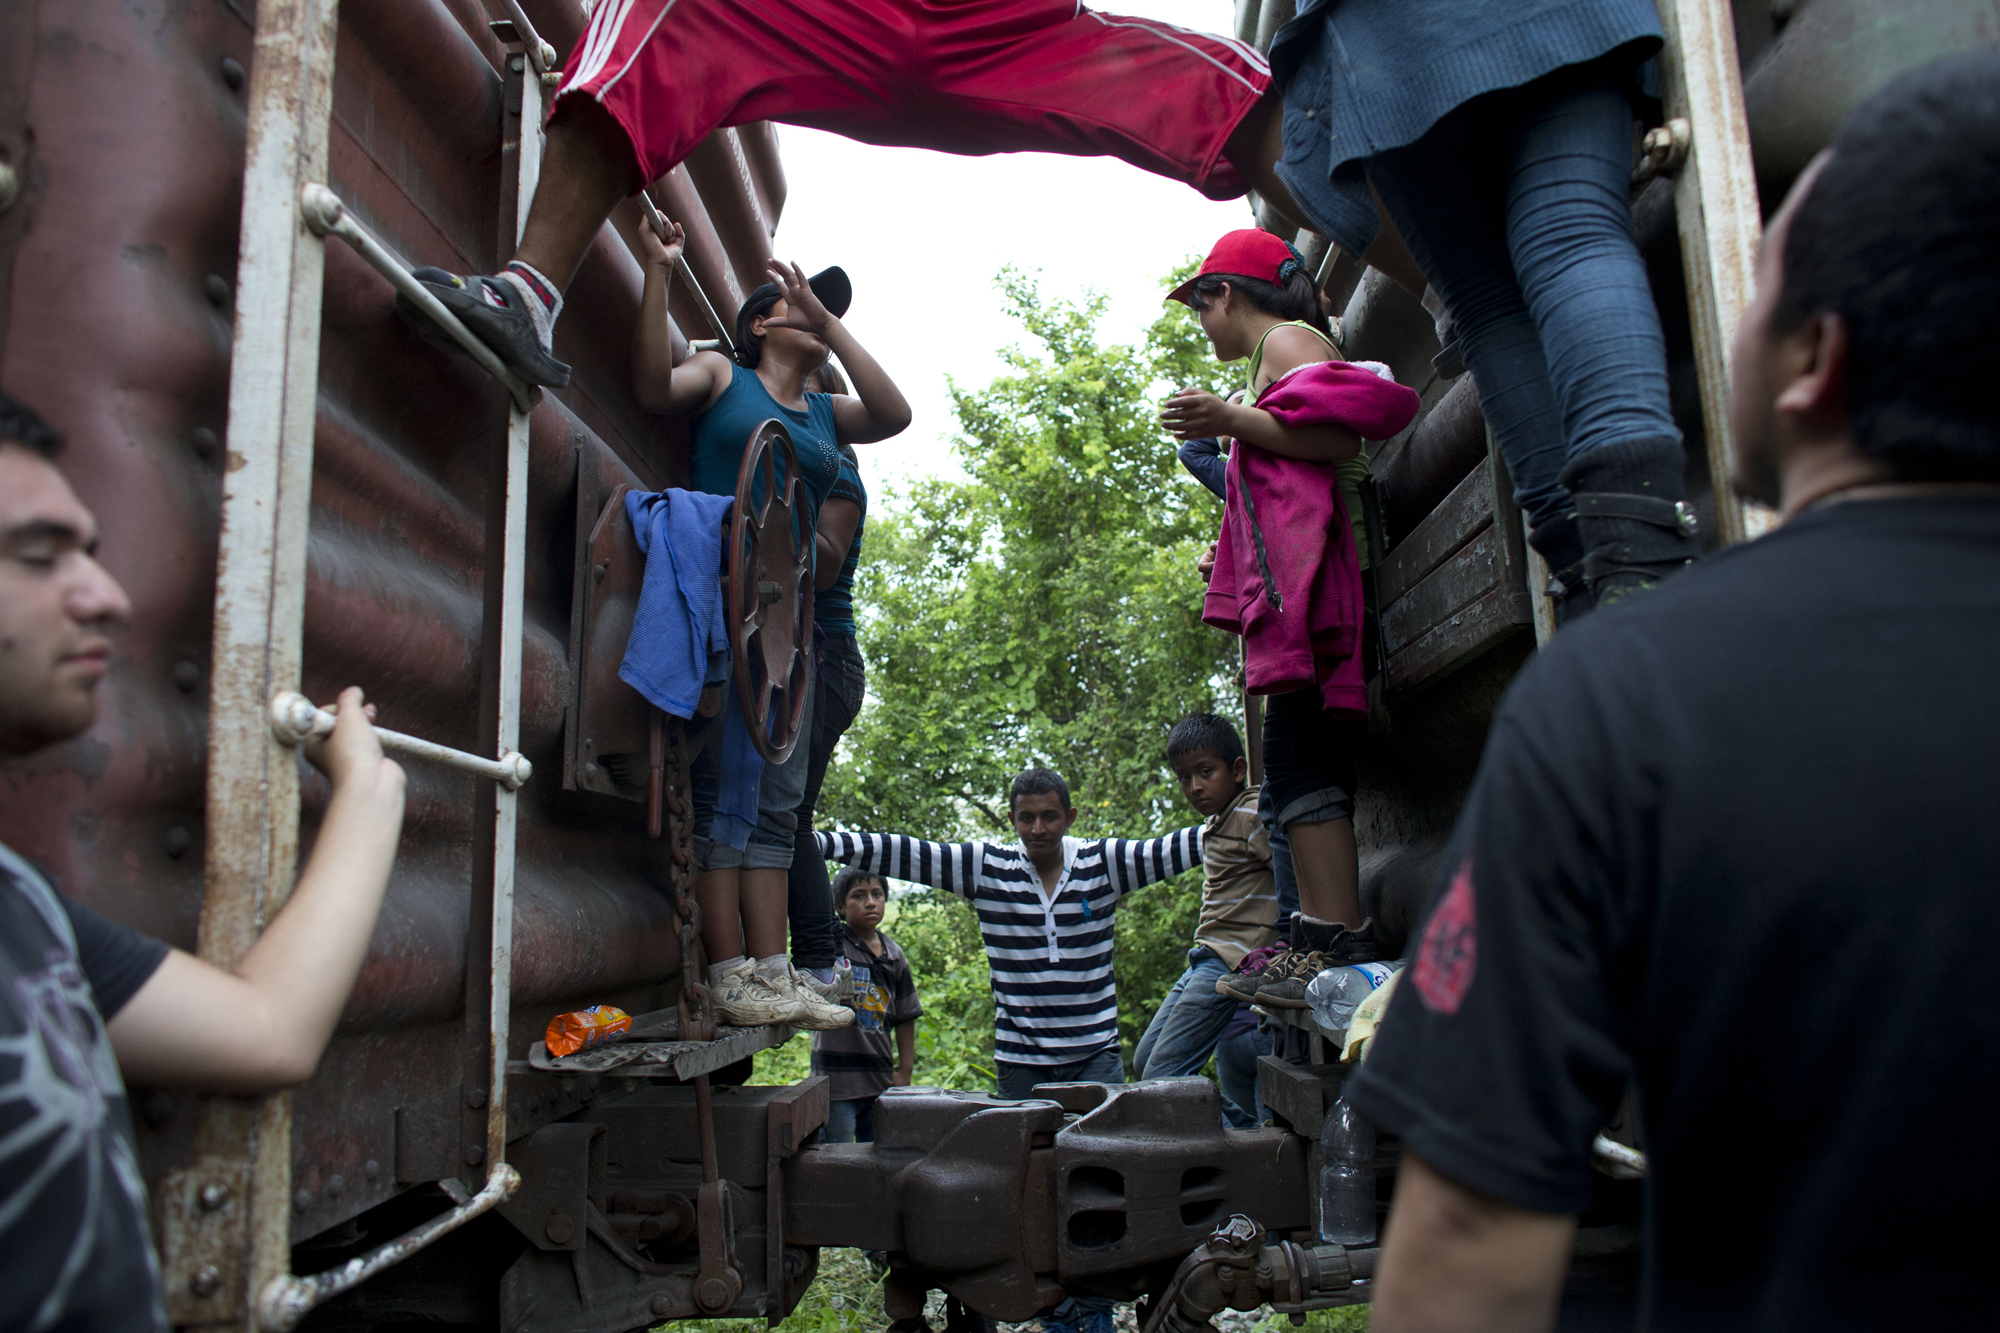 Central American migrants hang out around the northbound freight train they had been traveling on, after it suffered a minor derailment in a remote wooded area outside Reforma de Pineda, Chiapas state, Mexico, June 20.